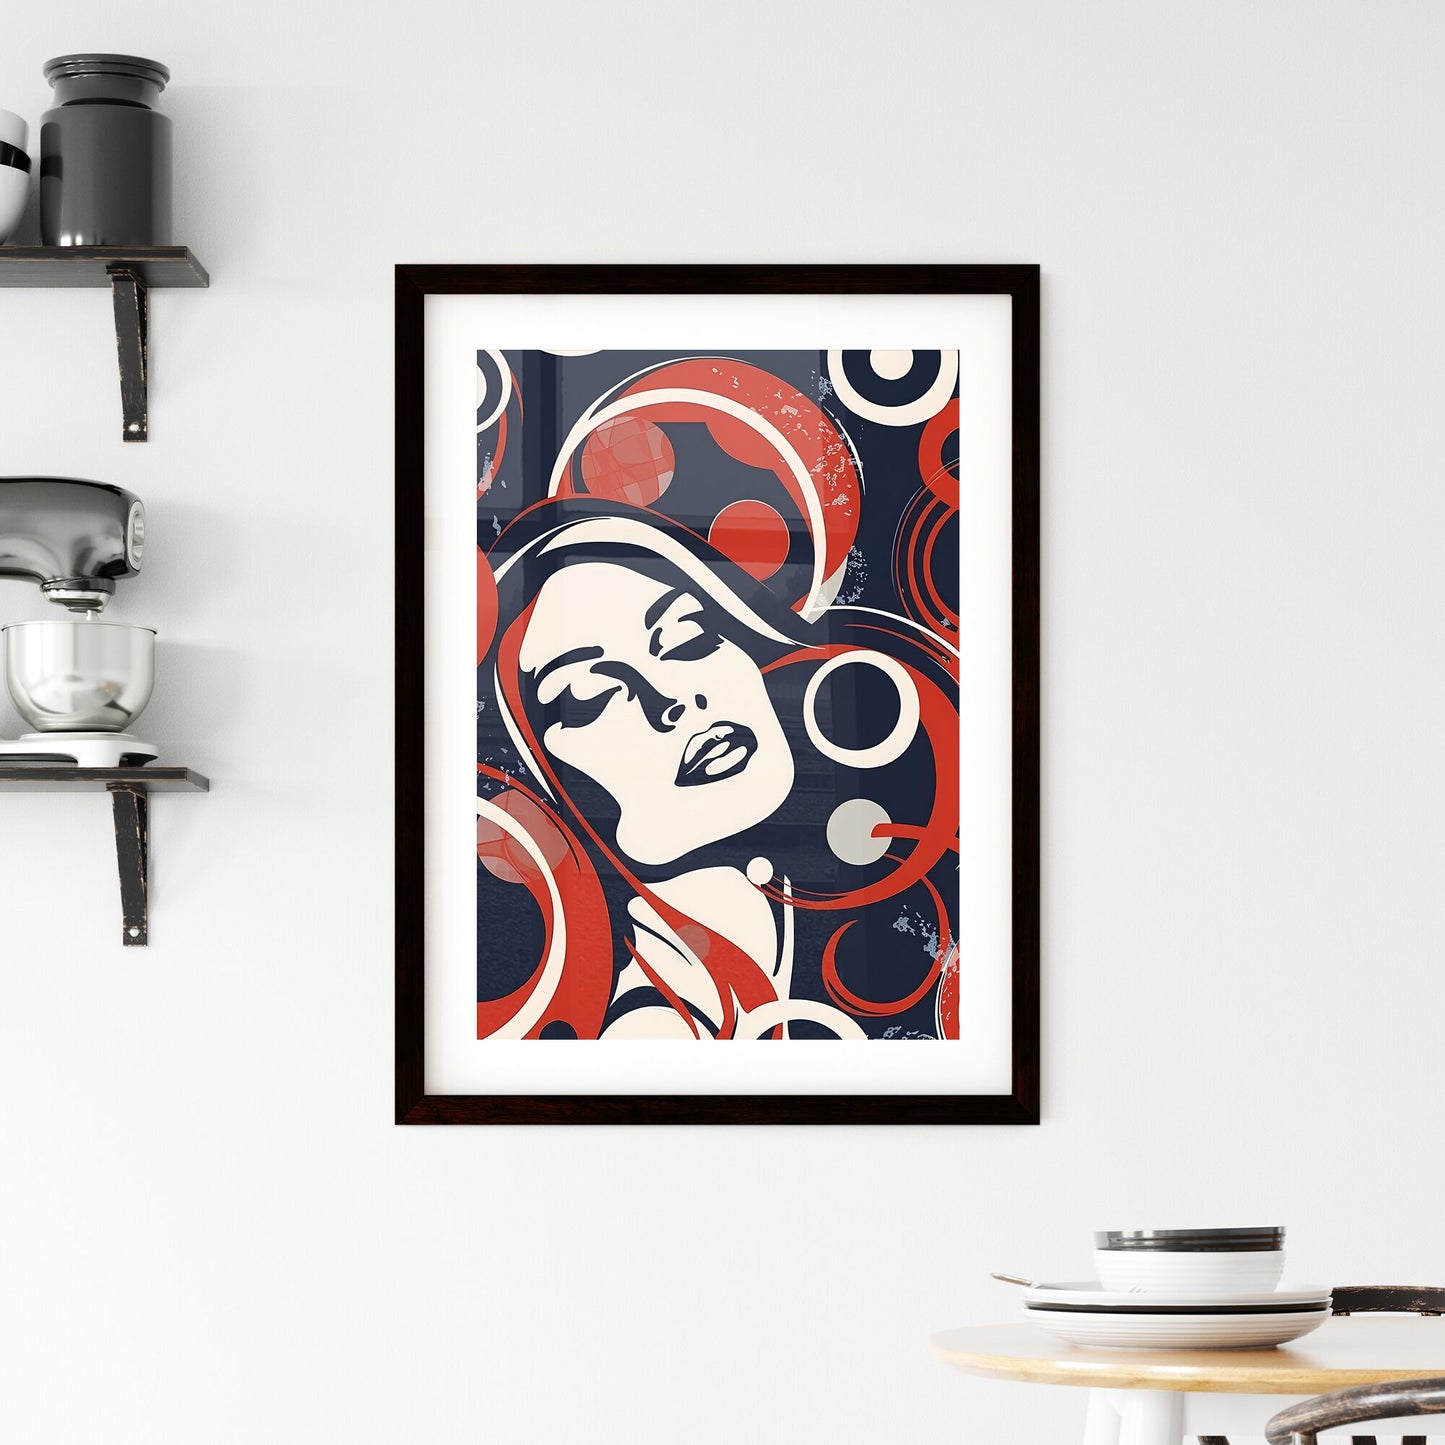 Vibrant Indonesian Art: Bold & Jazzy Flair of Dark Orange Woman with Red, White, and Blue Circles – Art Deco-inspired Stock Image! Default Title